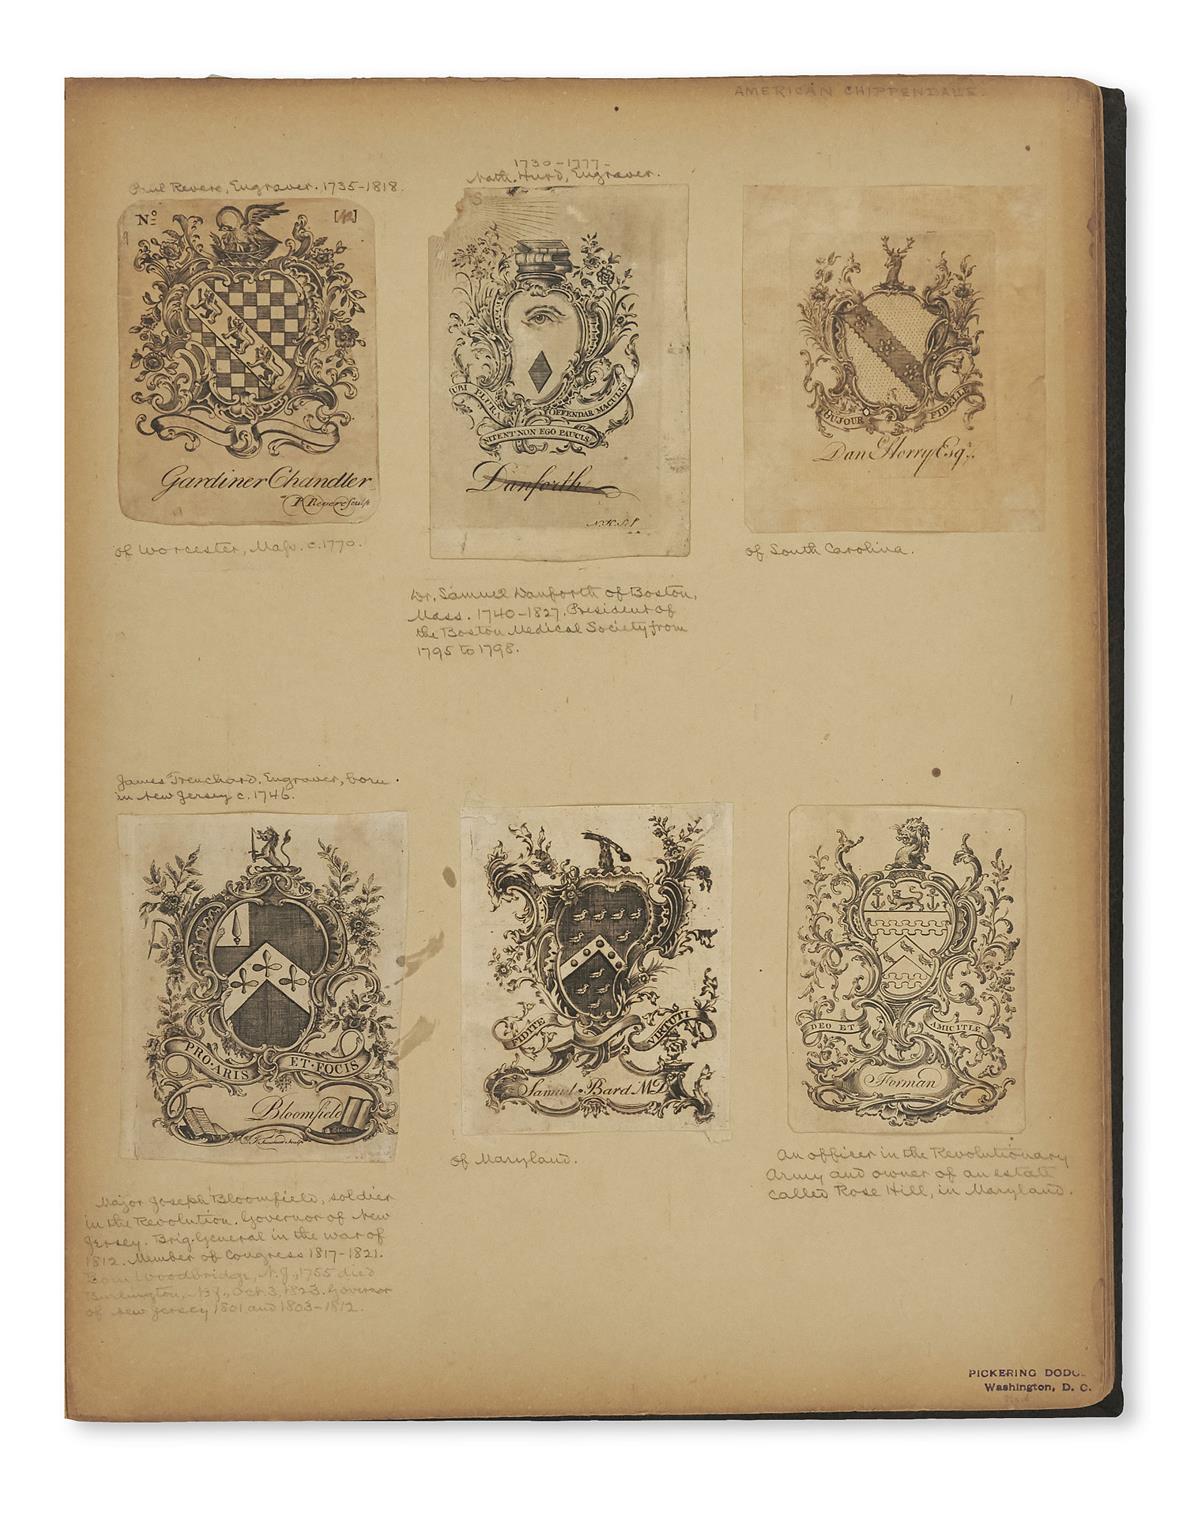 (BOOKPLATES.) Over 750 eighteenth-to-nineteenth-century engraved bookplates, ownership labels, bookseller’s tickets, etc.